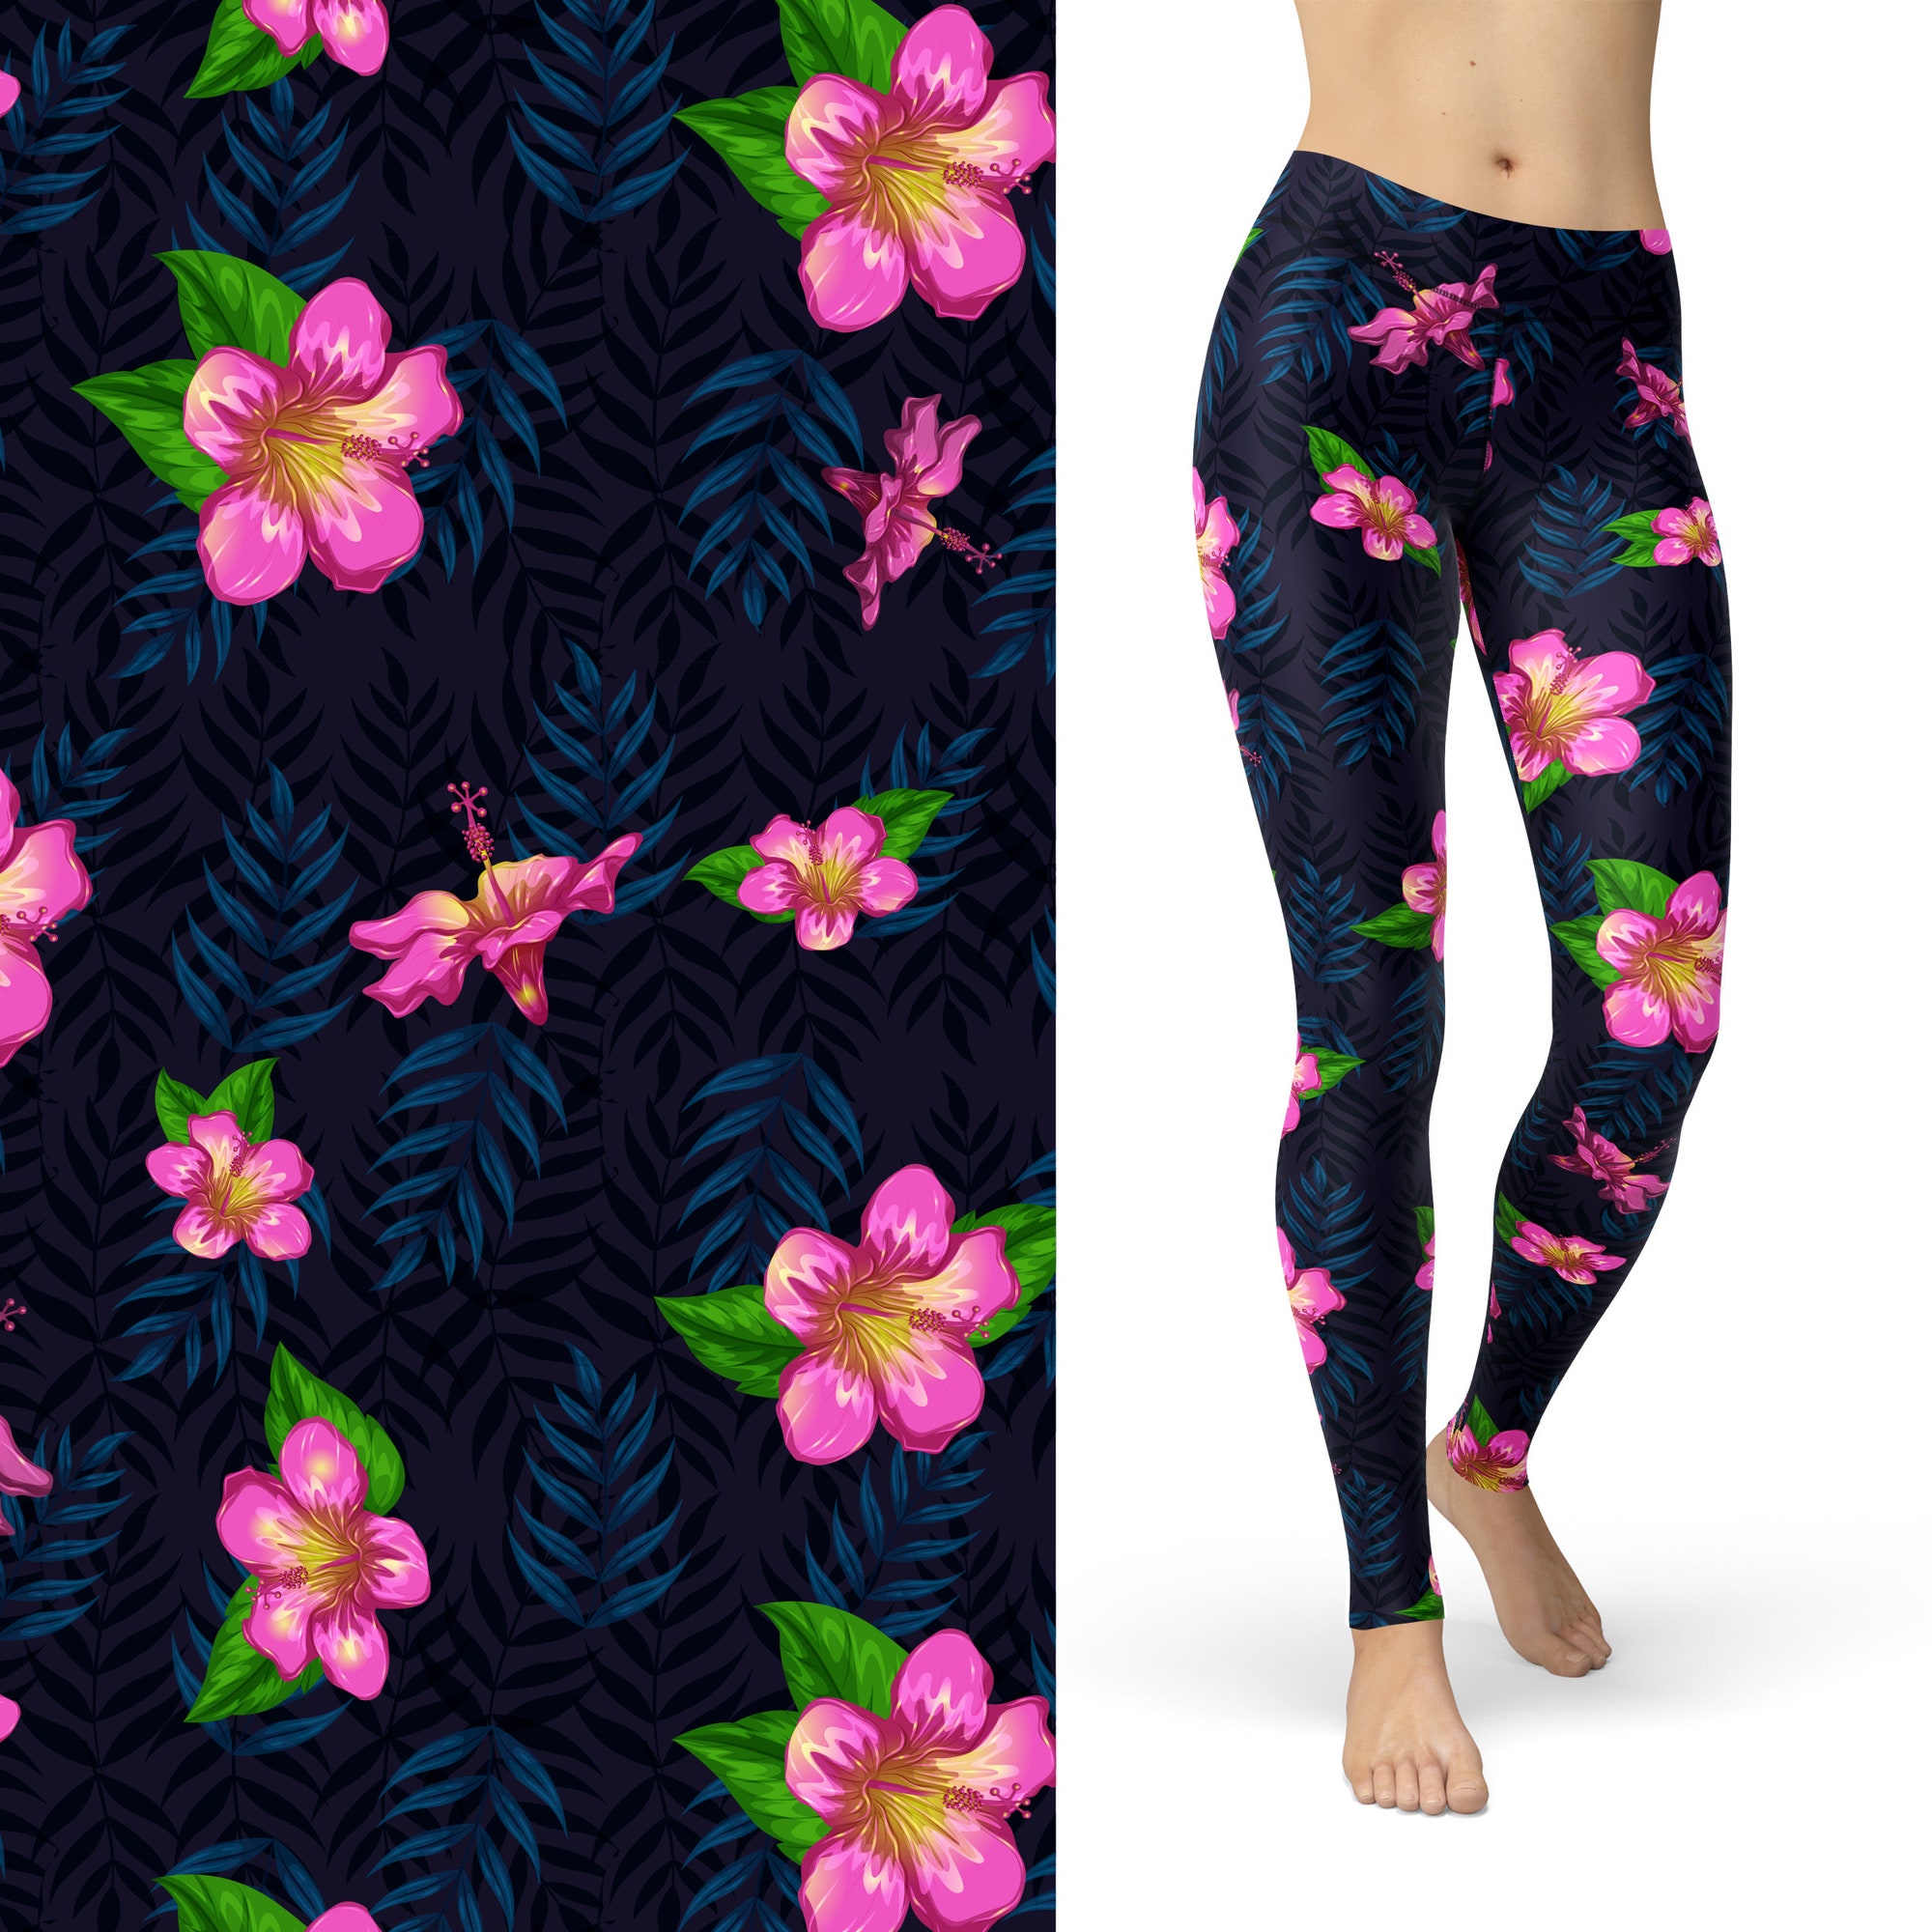 Discover Women's Hibiscus Flower Printed Leggings - Ready to Ship